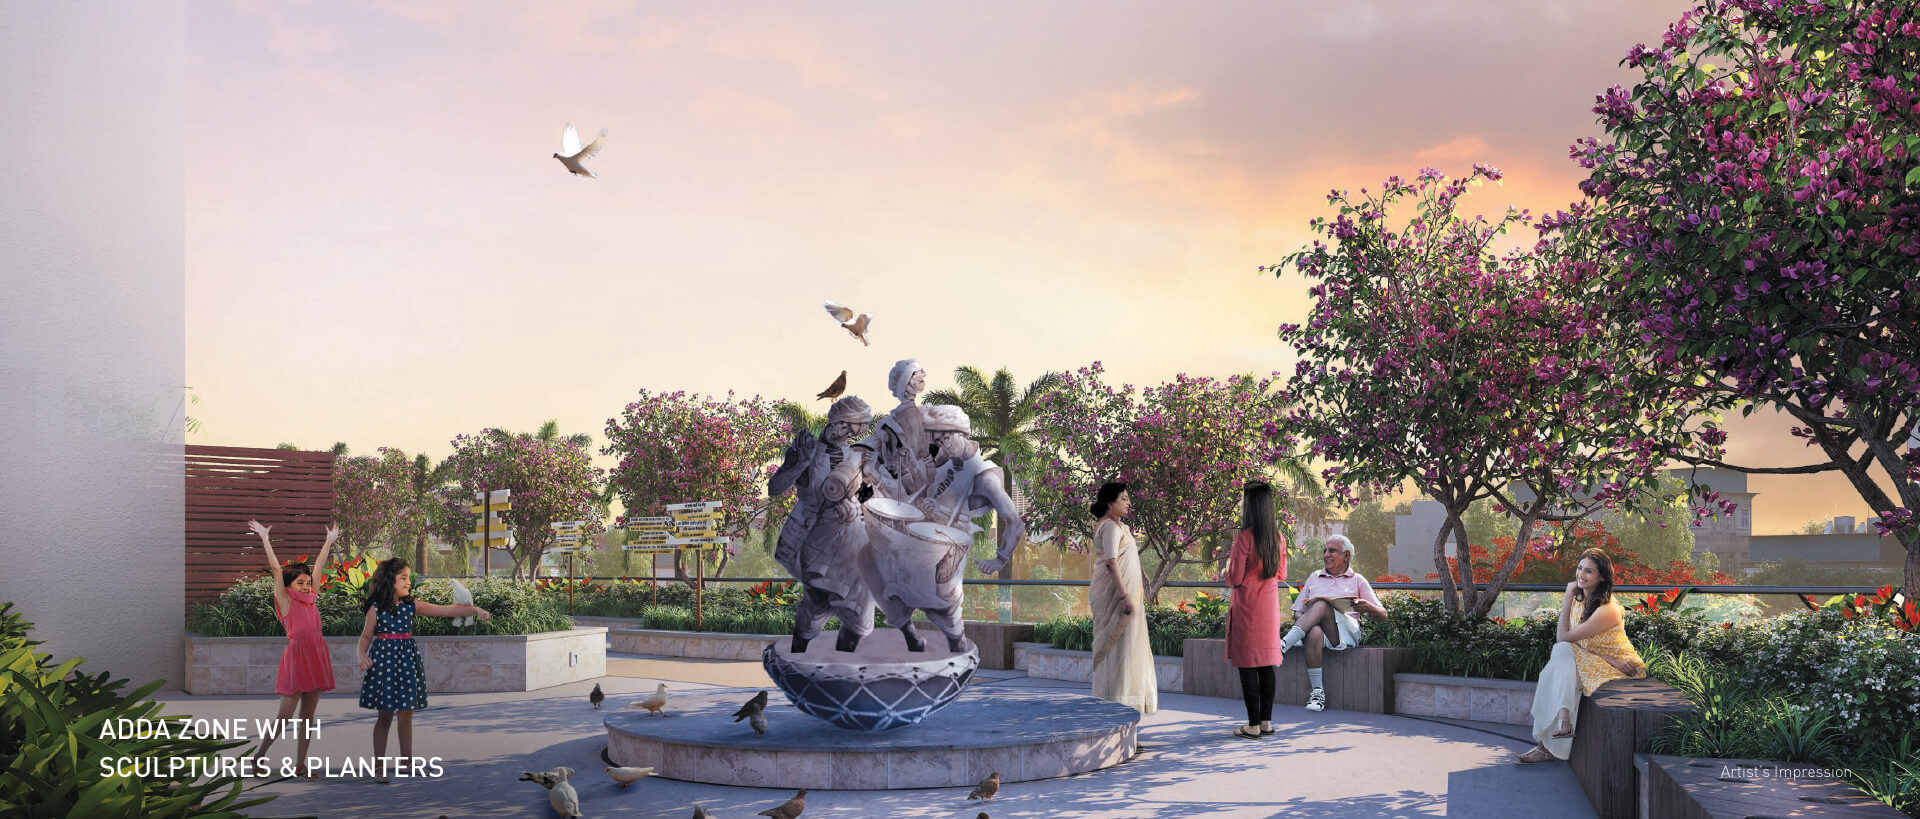 Adda Zone with Sculptures and Planters